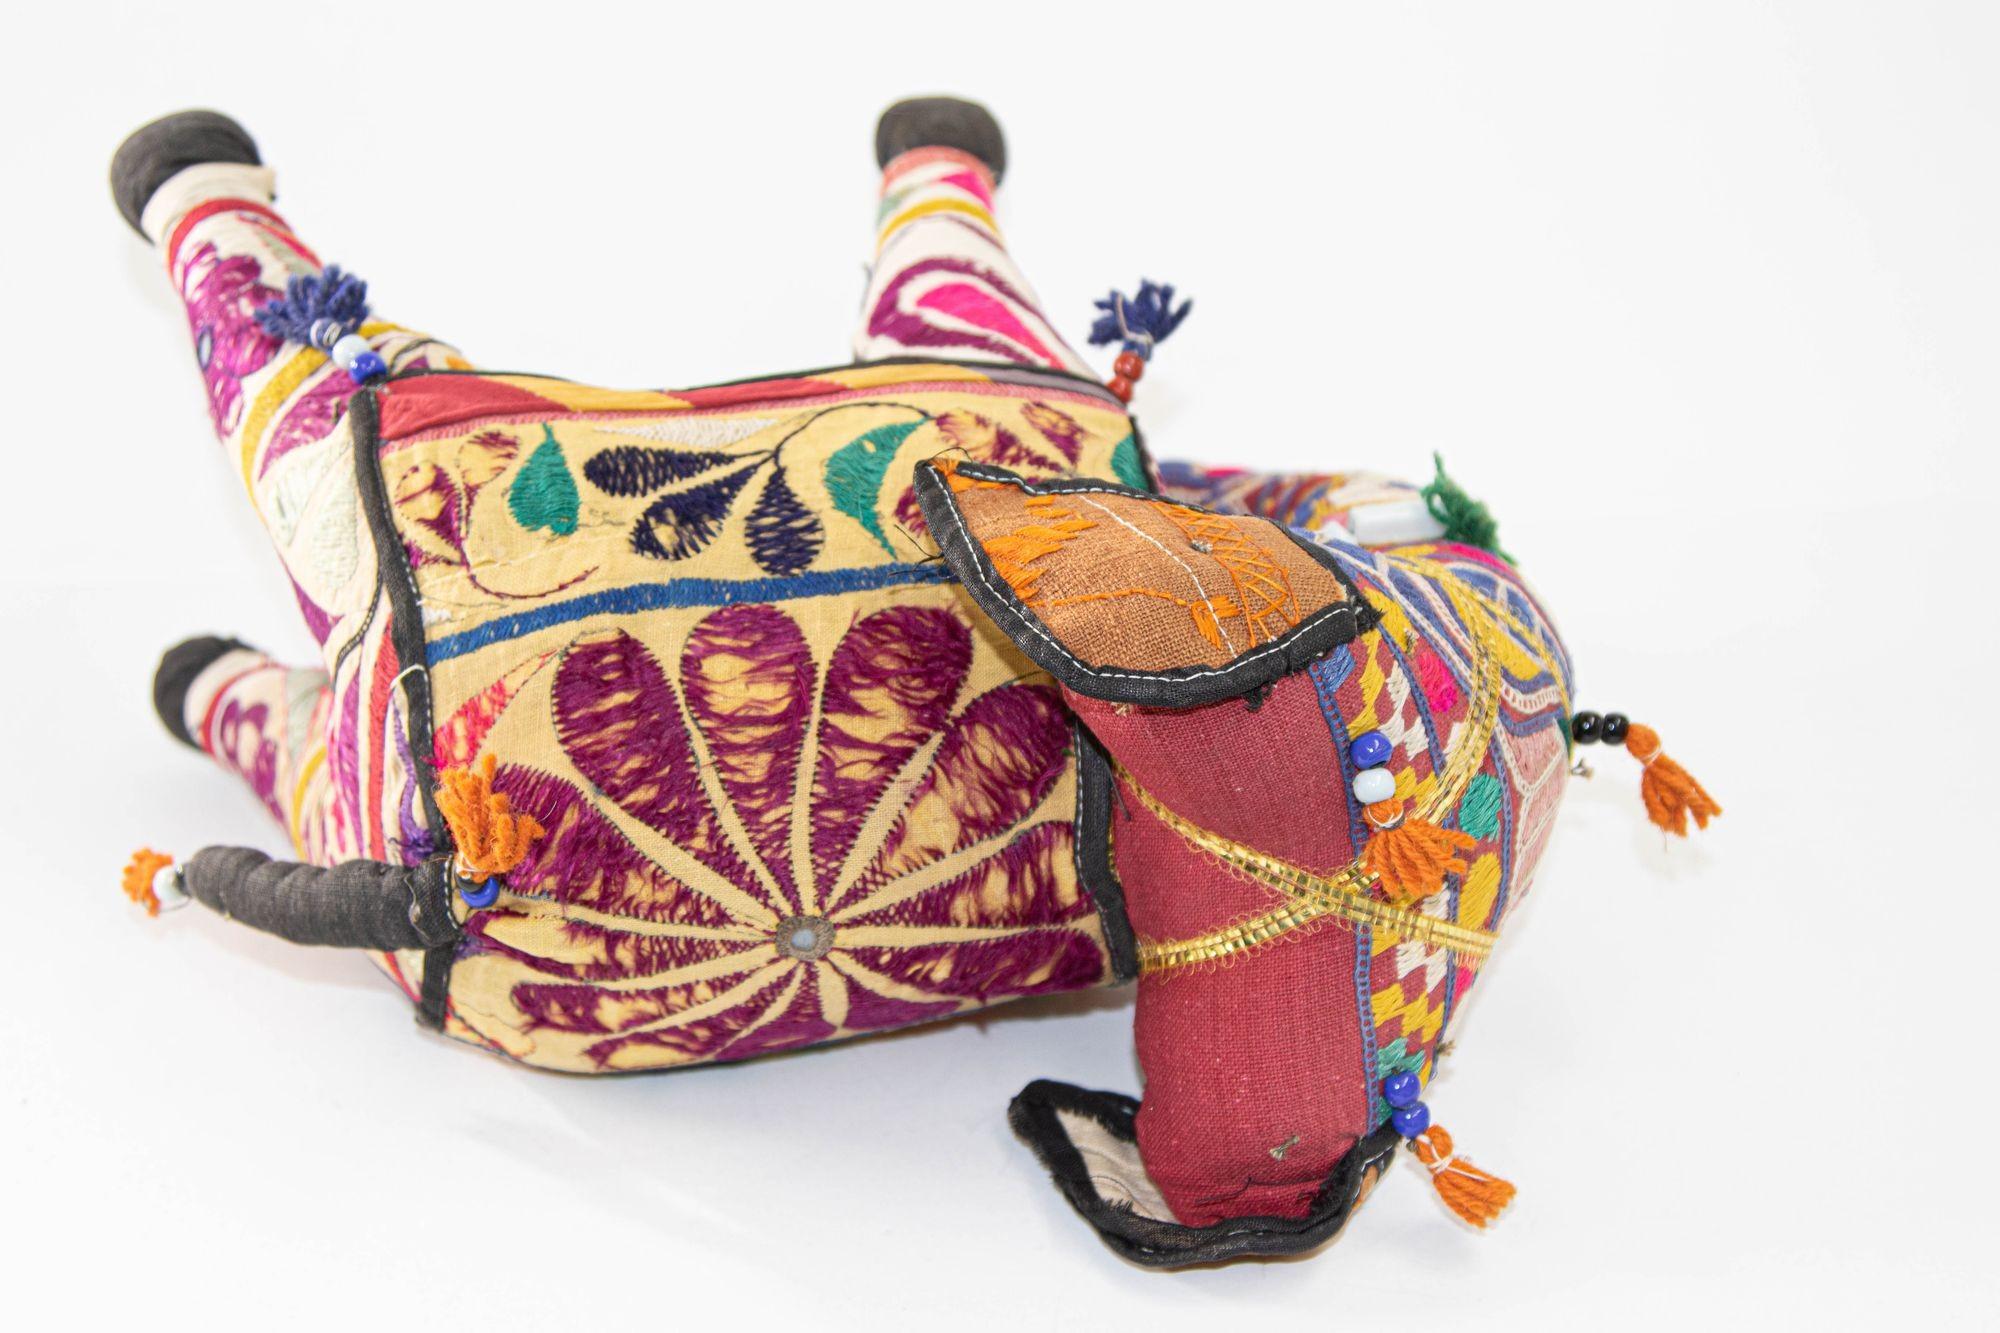 Indian Vintage Handcrafted Stuffed Cotton Embroidered Ceremonial Elephant Toy Raj India For Sale